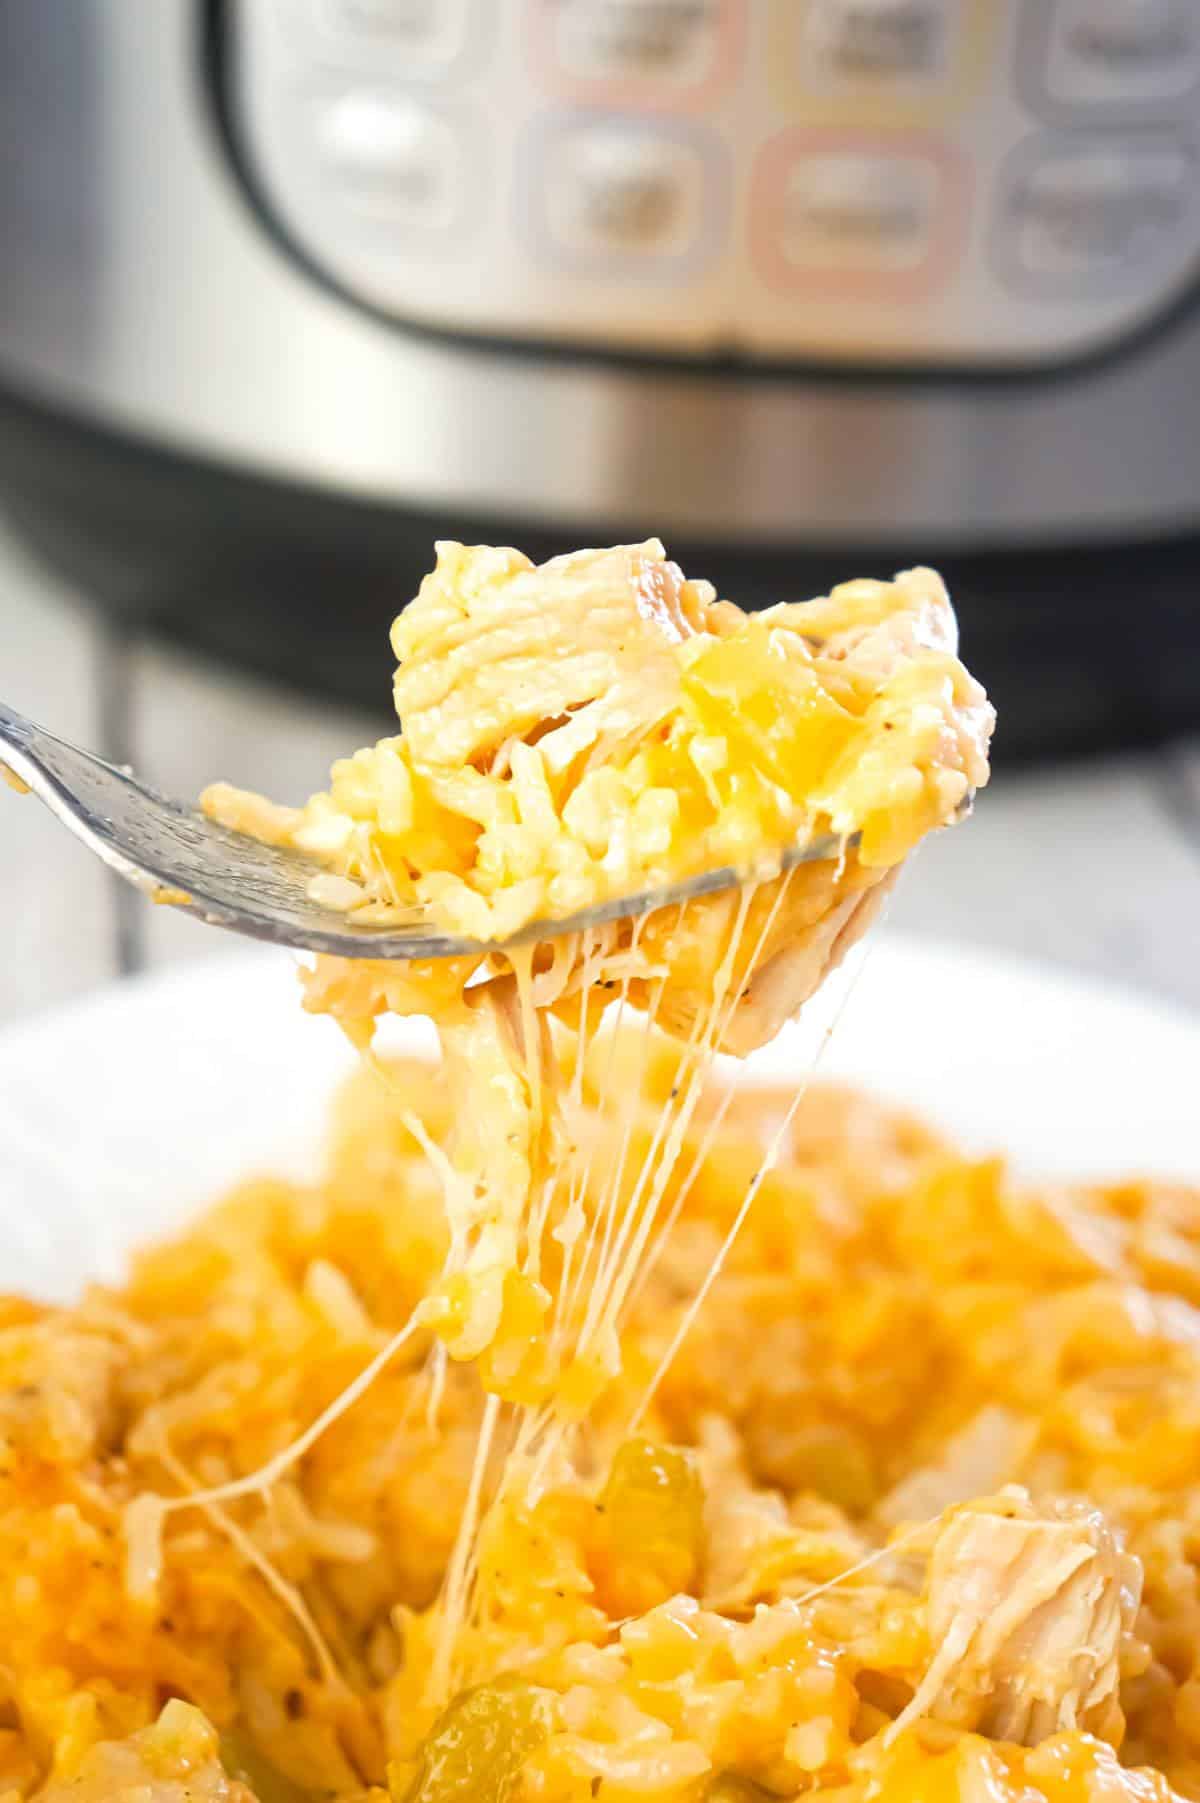 Instant Pot Cheesy Buffalo Chicken and Rice is an easy pressure cooker dinner recipe loaded with chicken breast chunks, long grain white rice, diced celery, buffalo sauce and shredded cheese.